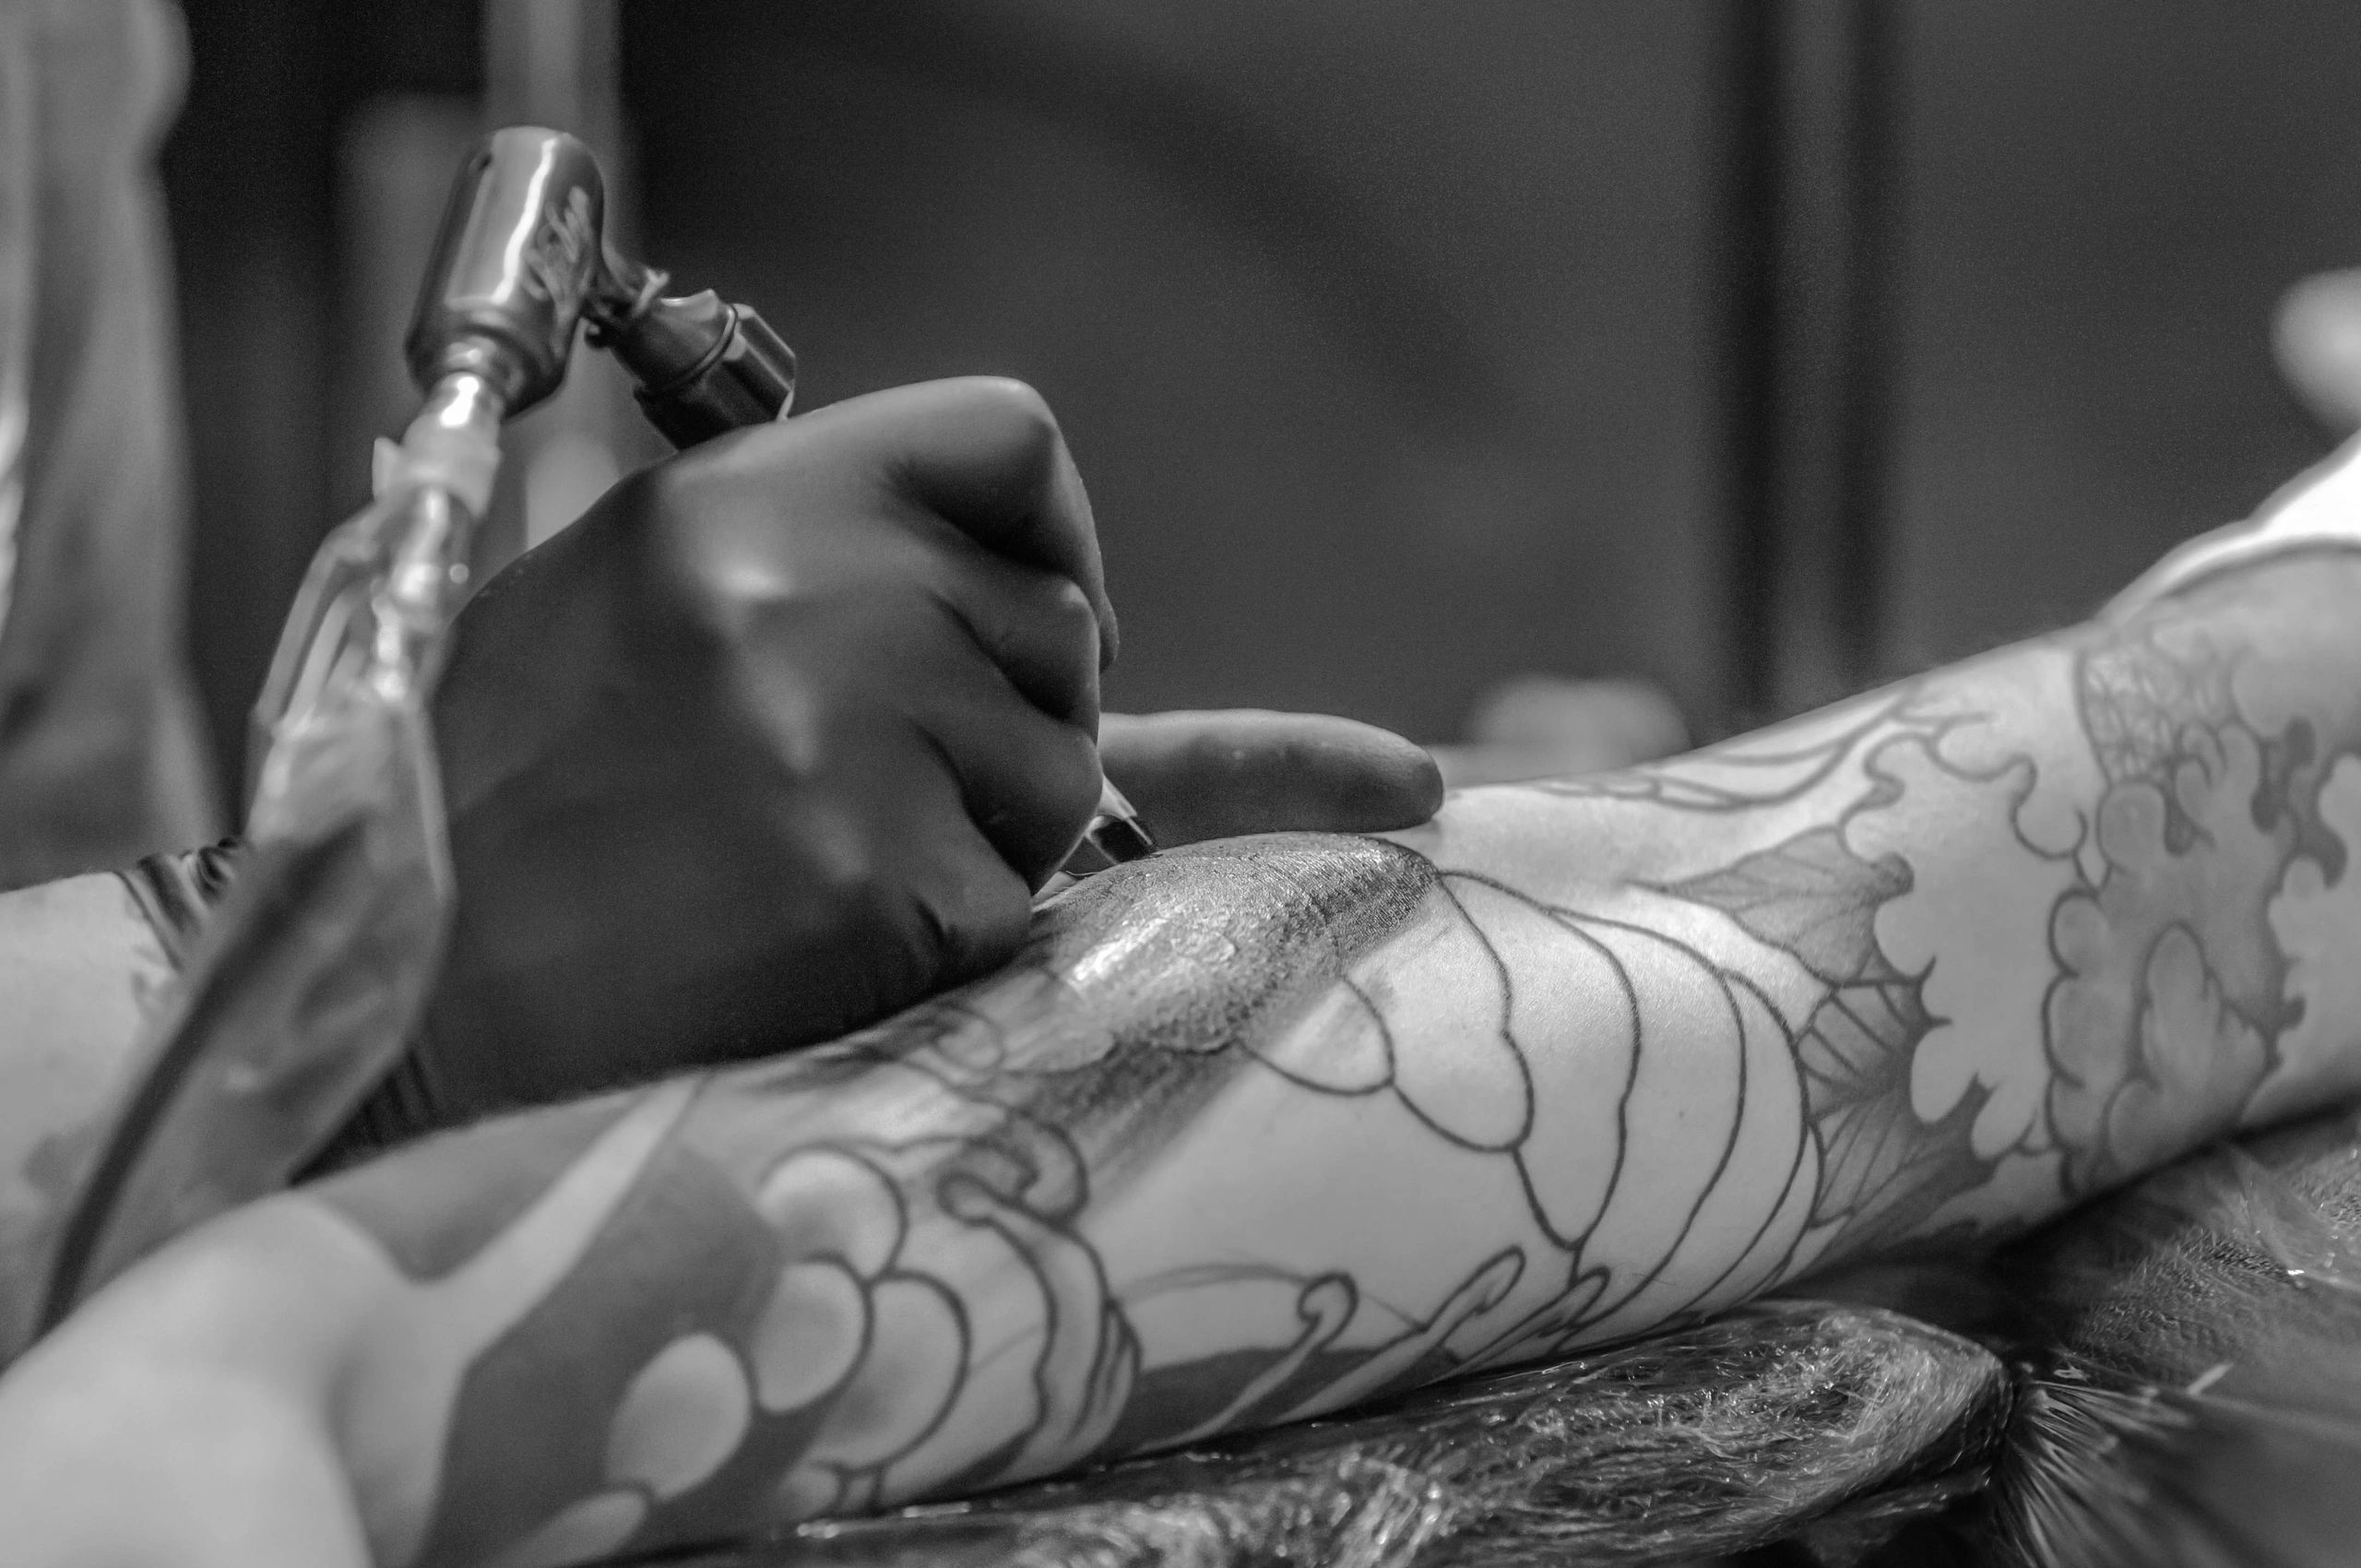 Illegal Ink Unlicensed tattoos a health risk